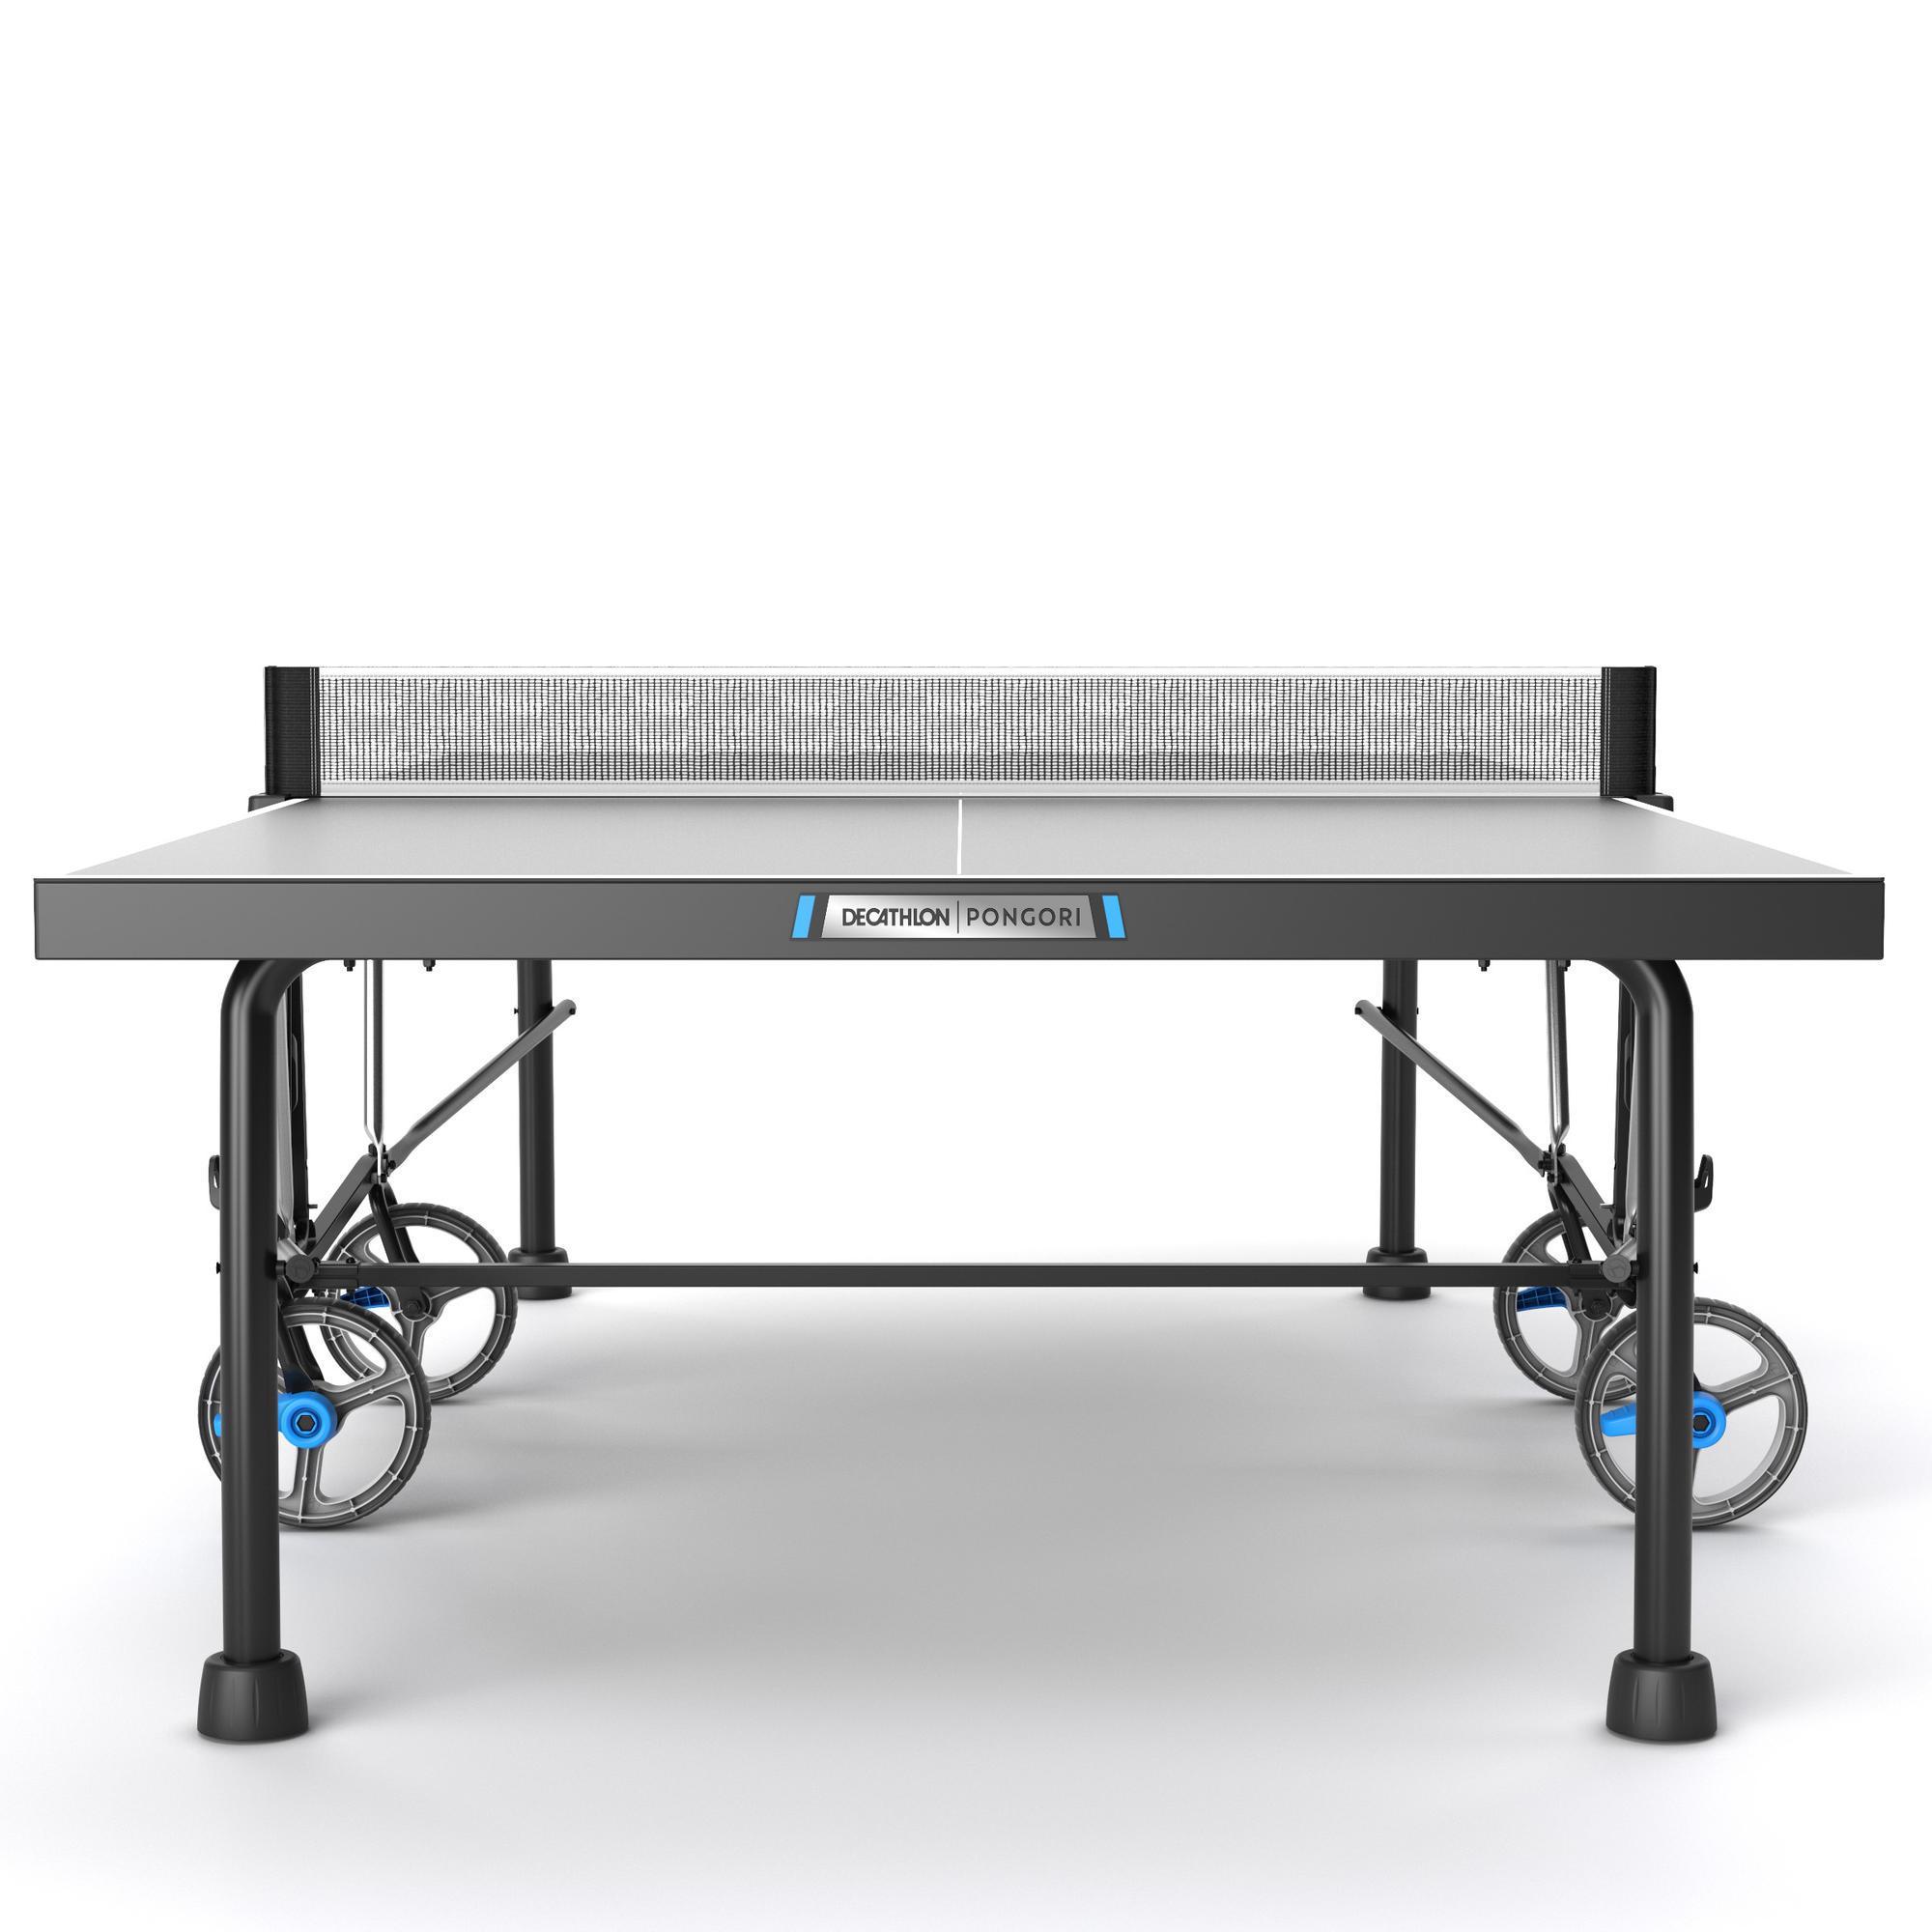 Outdoor Table Tennis Table PPT 930 